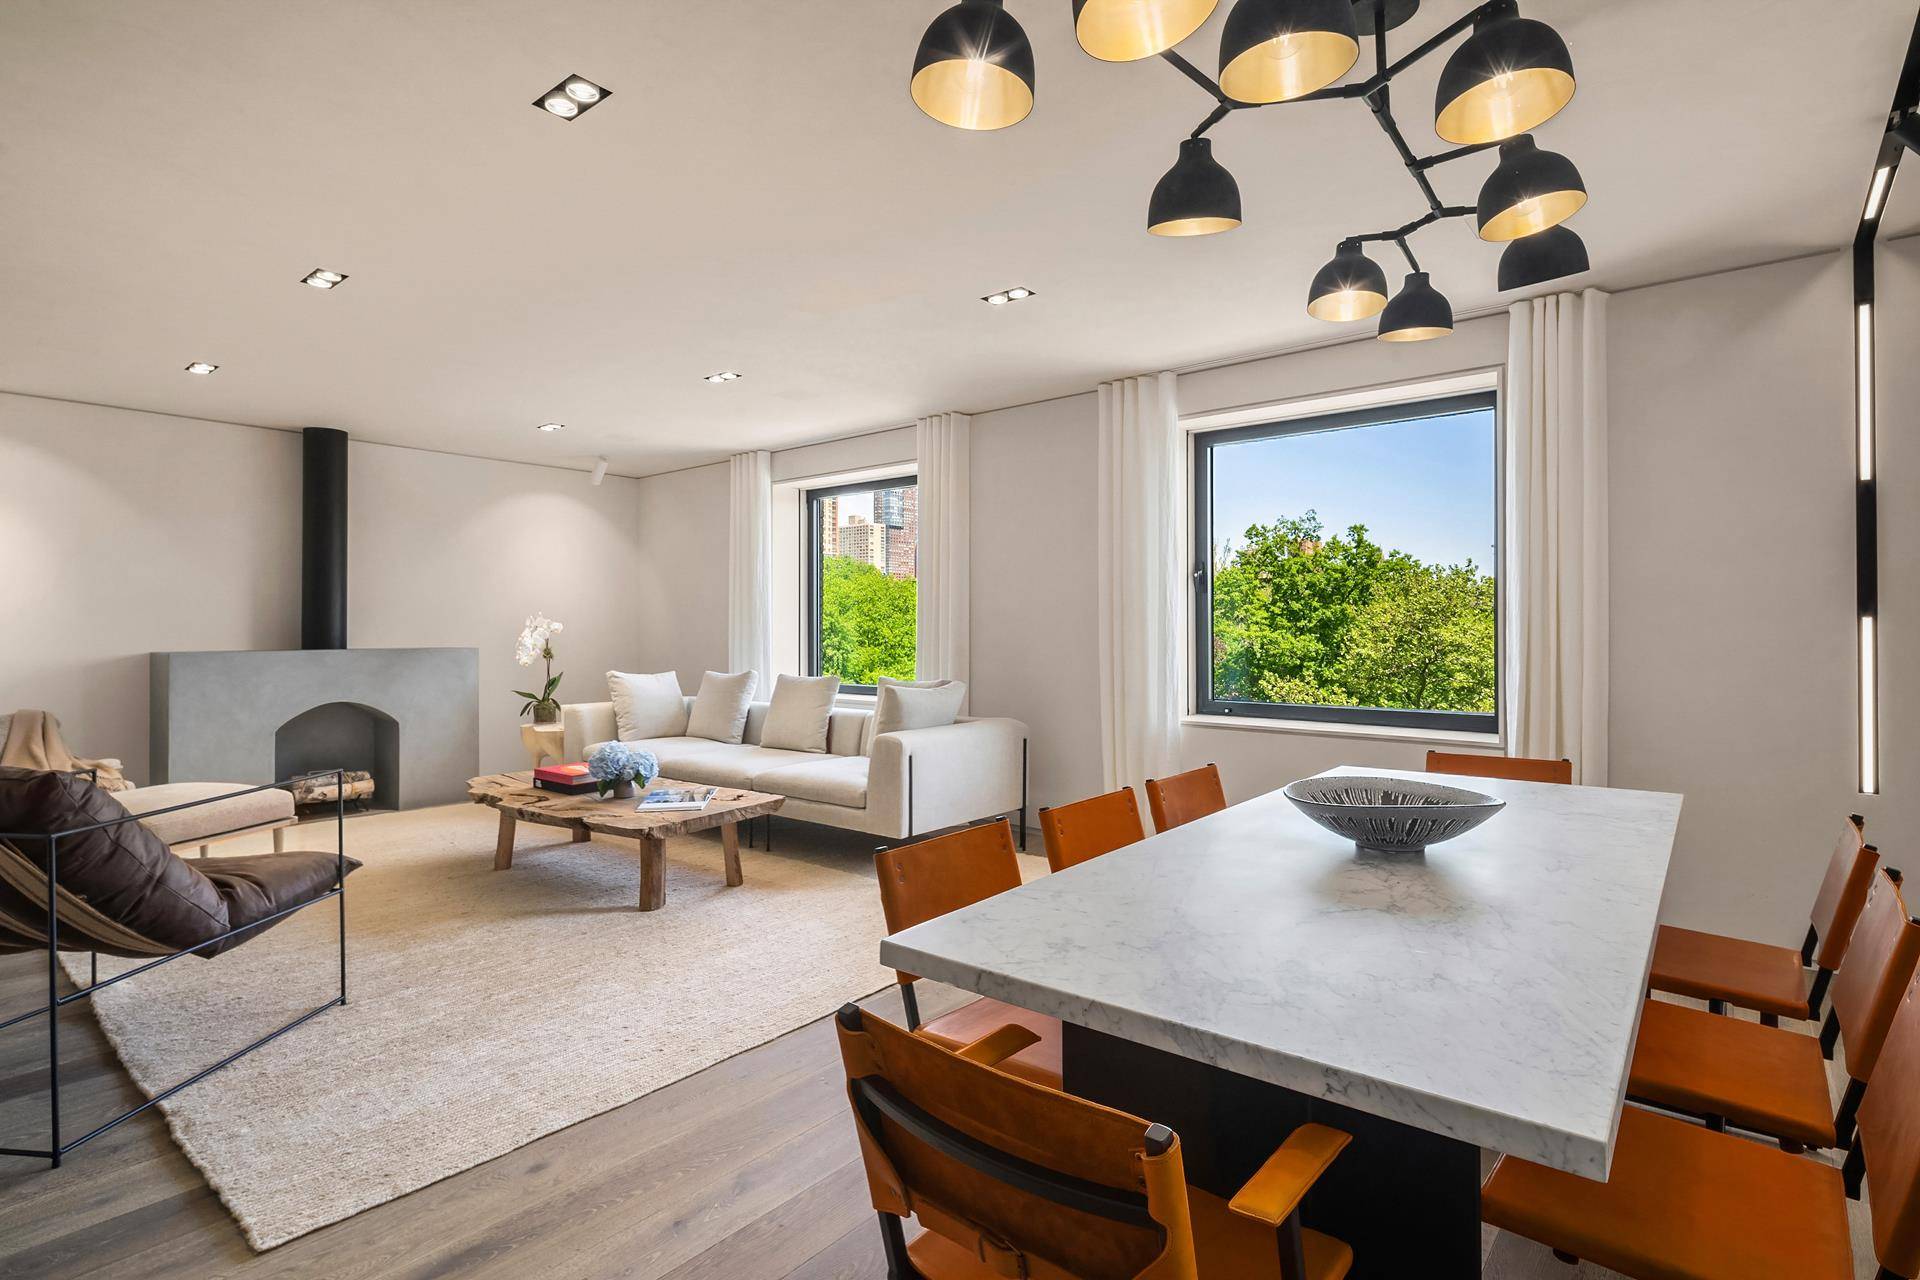 Newly constructed, this exquisitely designed two bedroom condominium at the iconic Essex House on Central Park South offers the ultimate lifestyle with full access to five star hotel services.